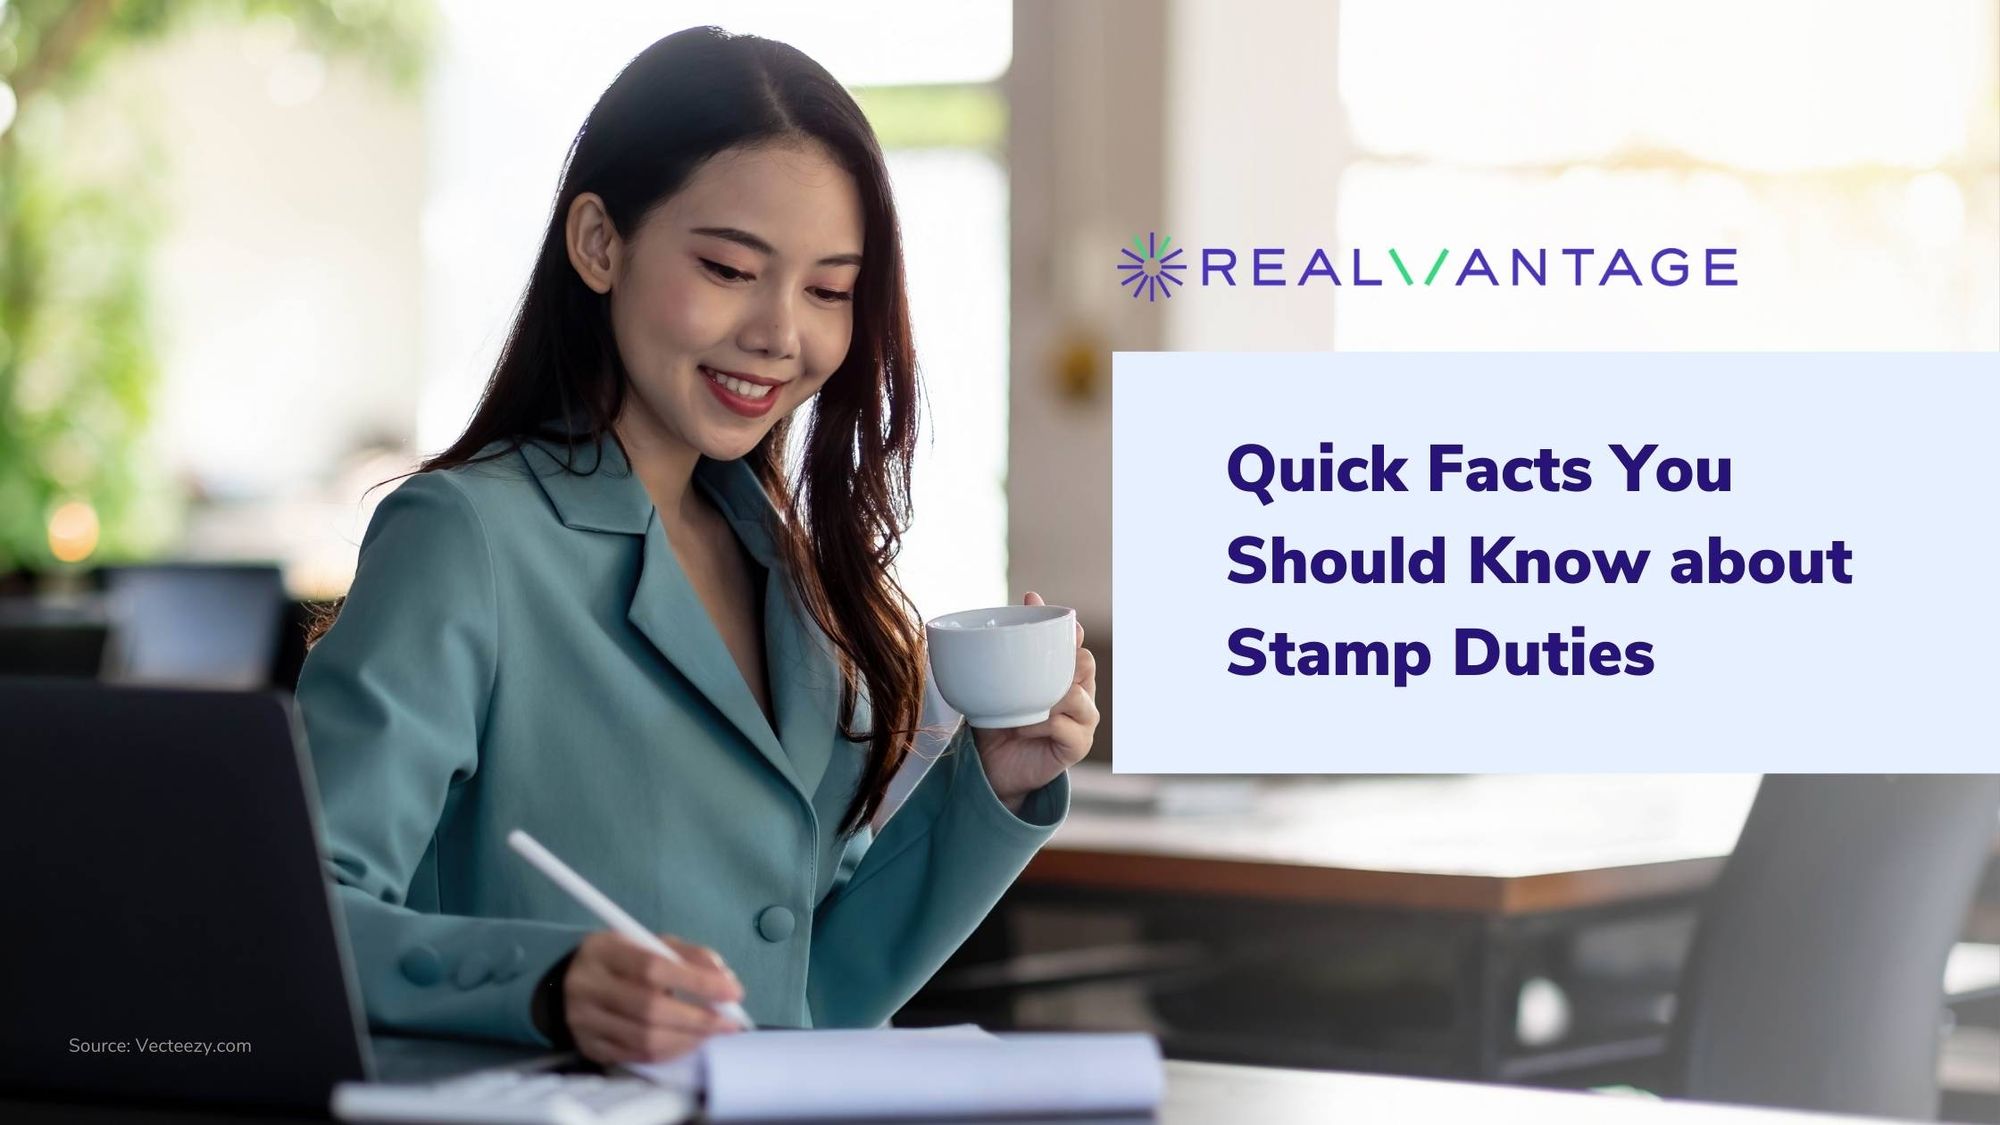 Quick Facts You Should Know about Stamp Duties